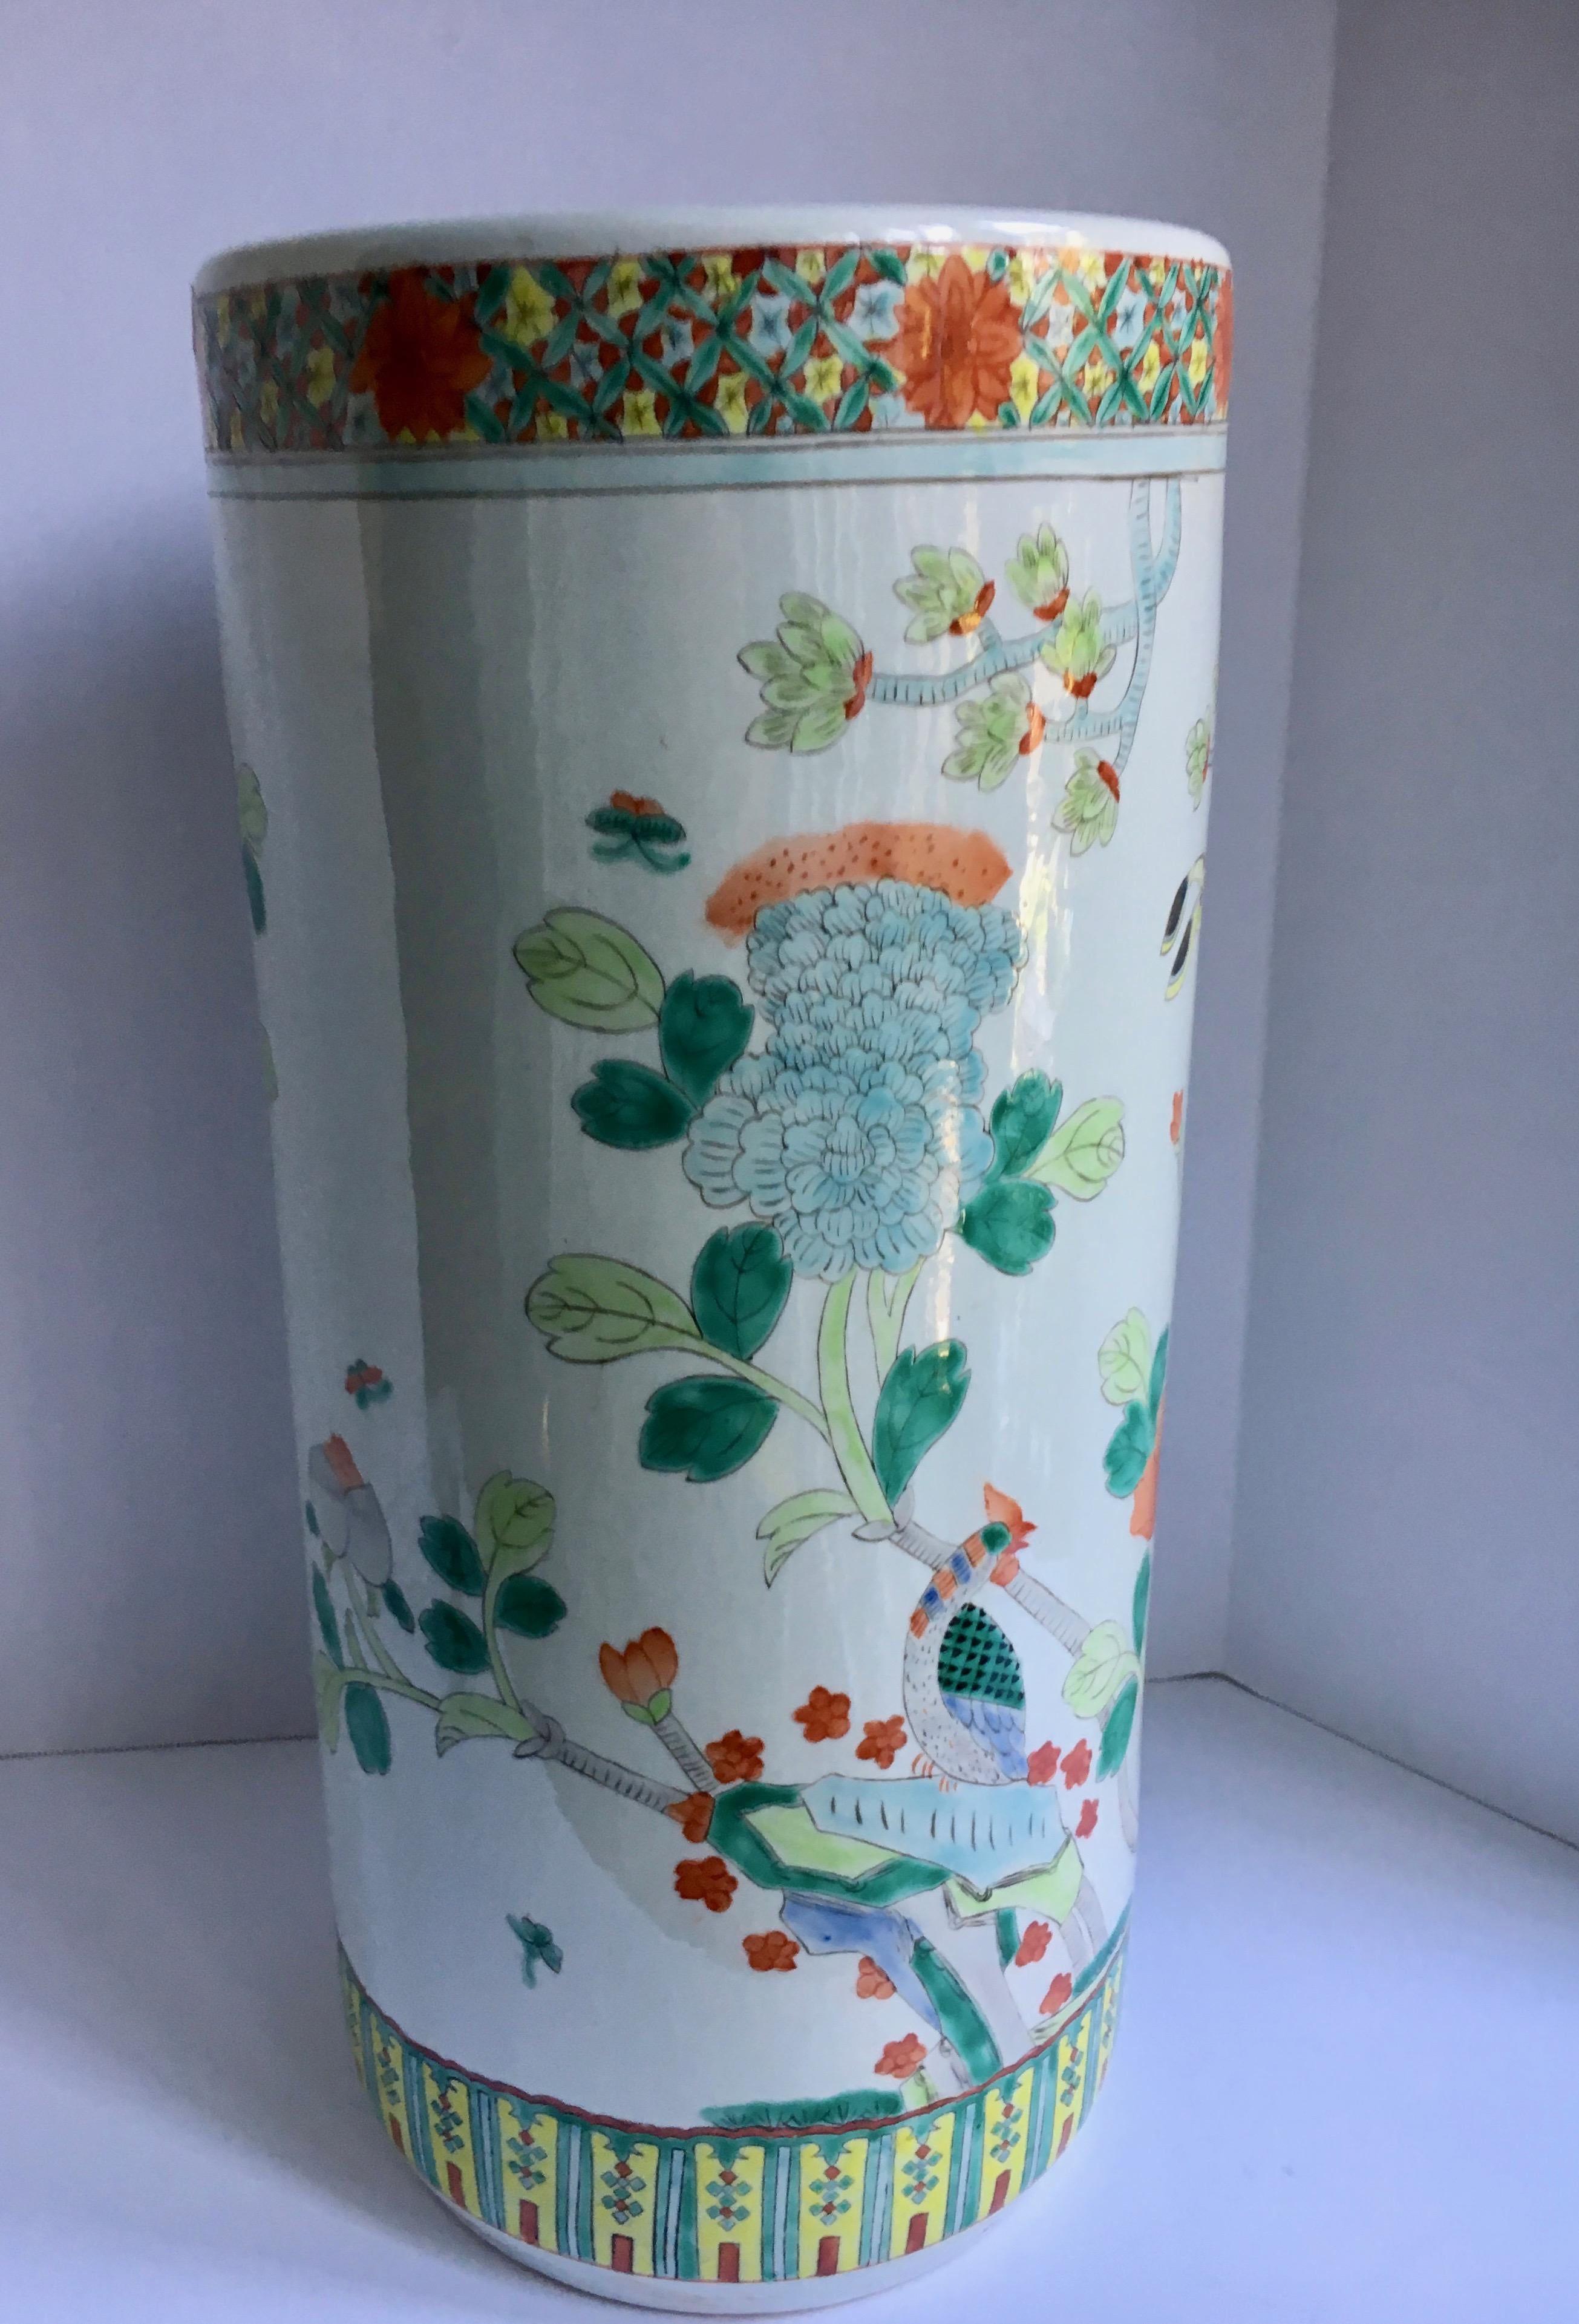 Chinese Porcelain Umbrella Stand - hand-painted and with a lovely color palette, working with most interiors. A lovely image, of good quality and substantial weight, ready to grace your interior and manage a host of umbrellas.